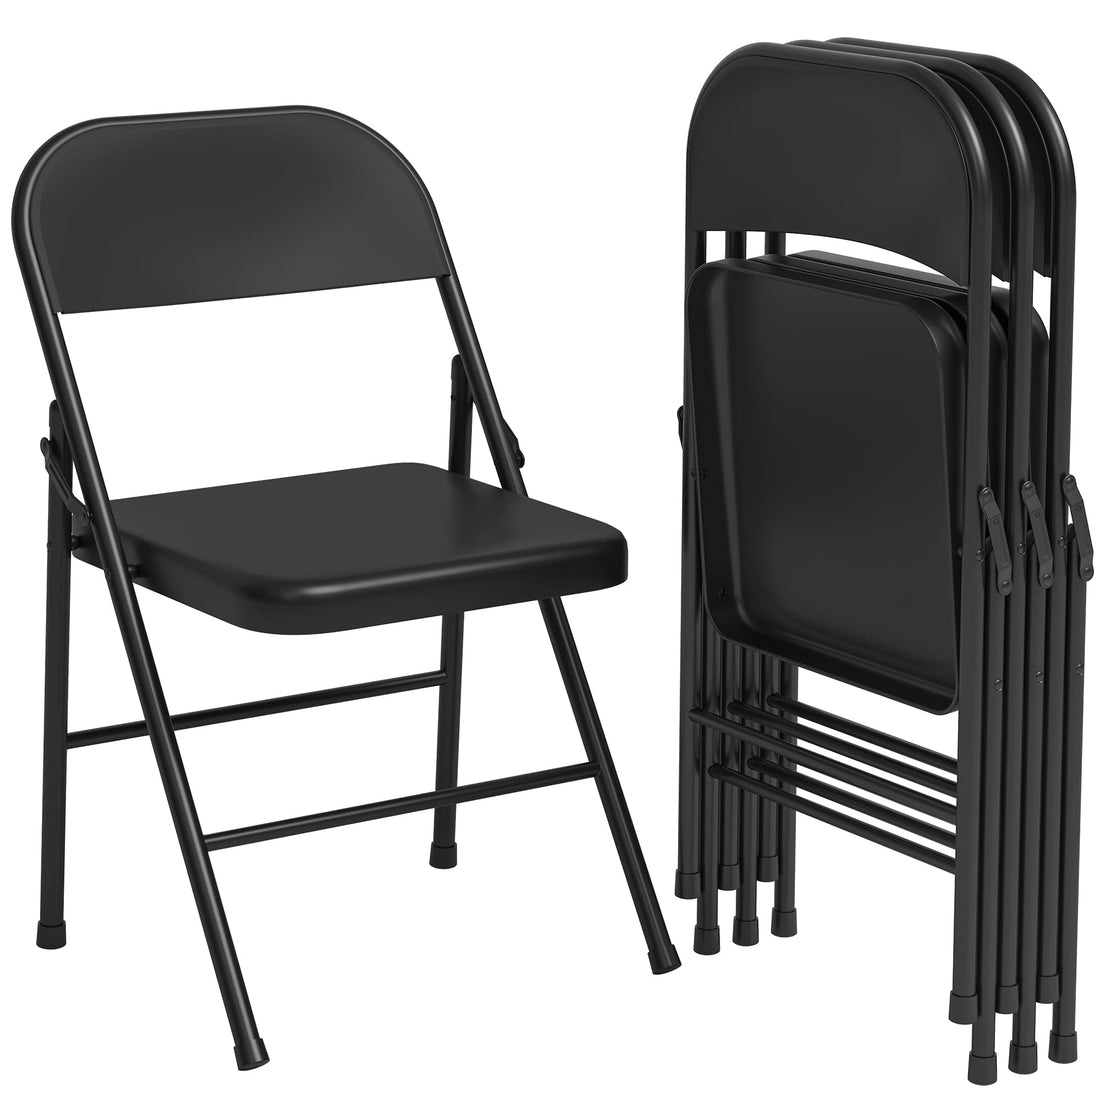 Folding Chairs Set of 4, Foldable Chairs with Metal Frame Hold Up to 350 Pounds, Portable Black Folding Chairs Suitable for Dining Room, Living Room, Office, Camping